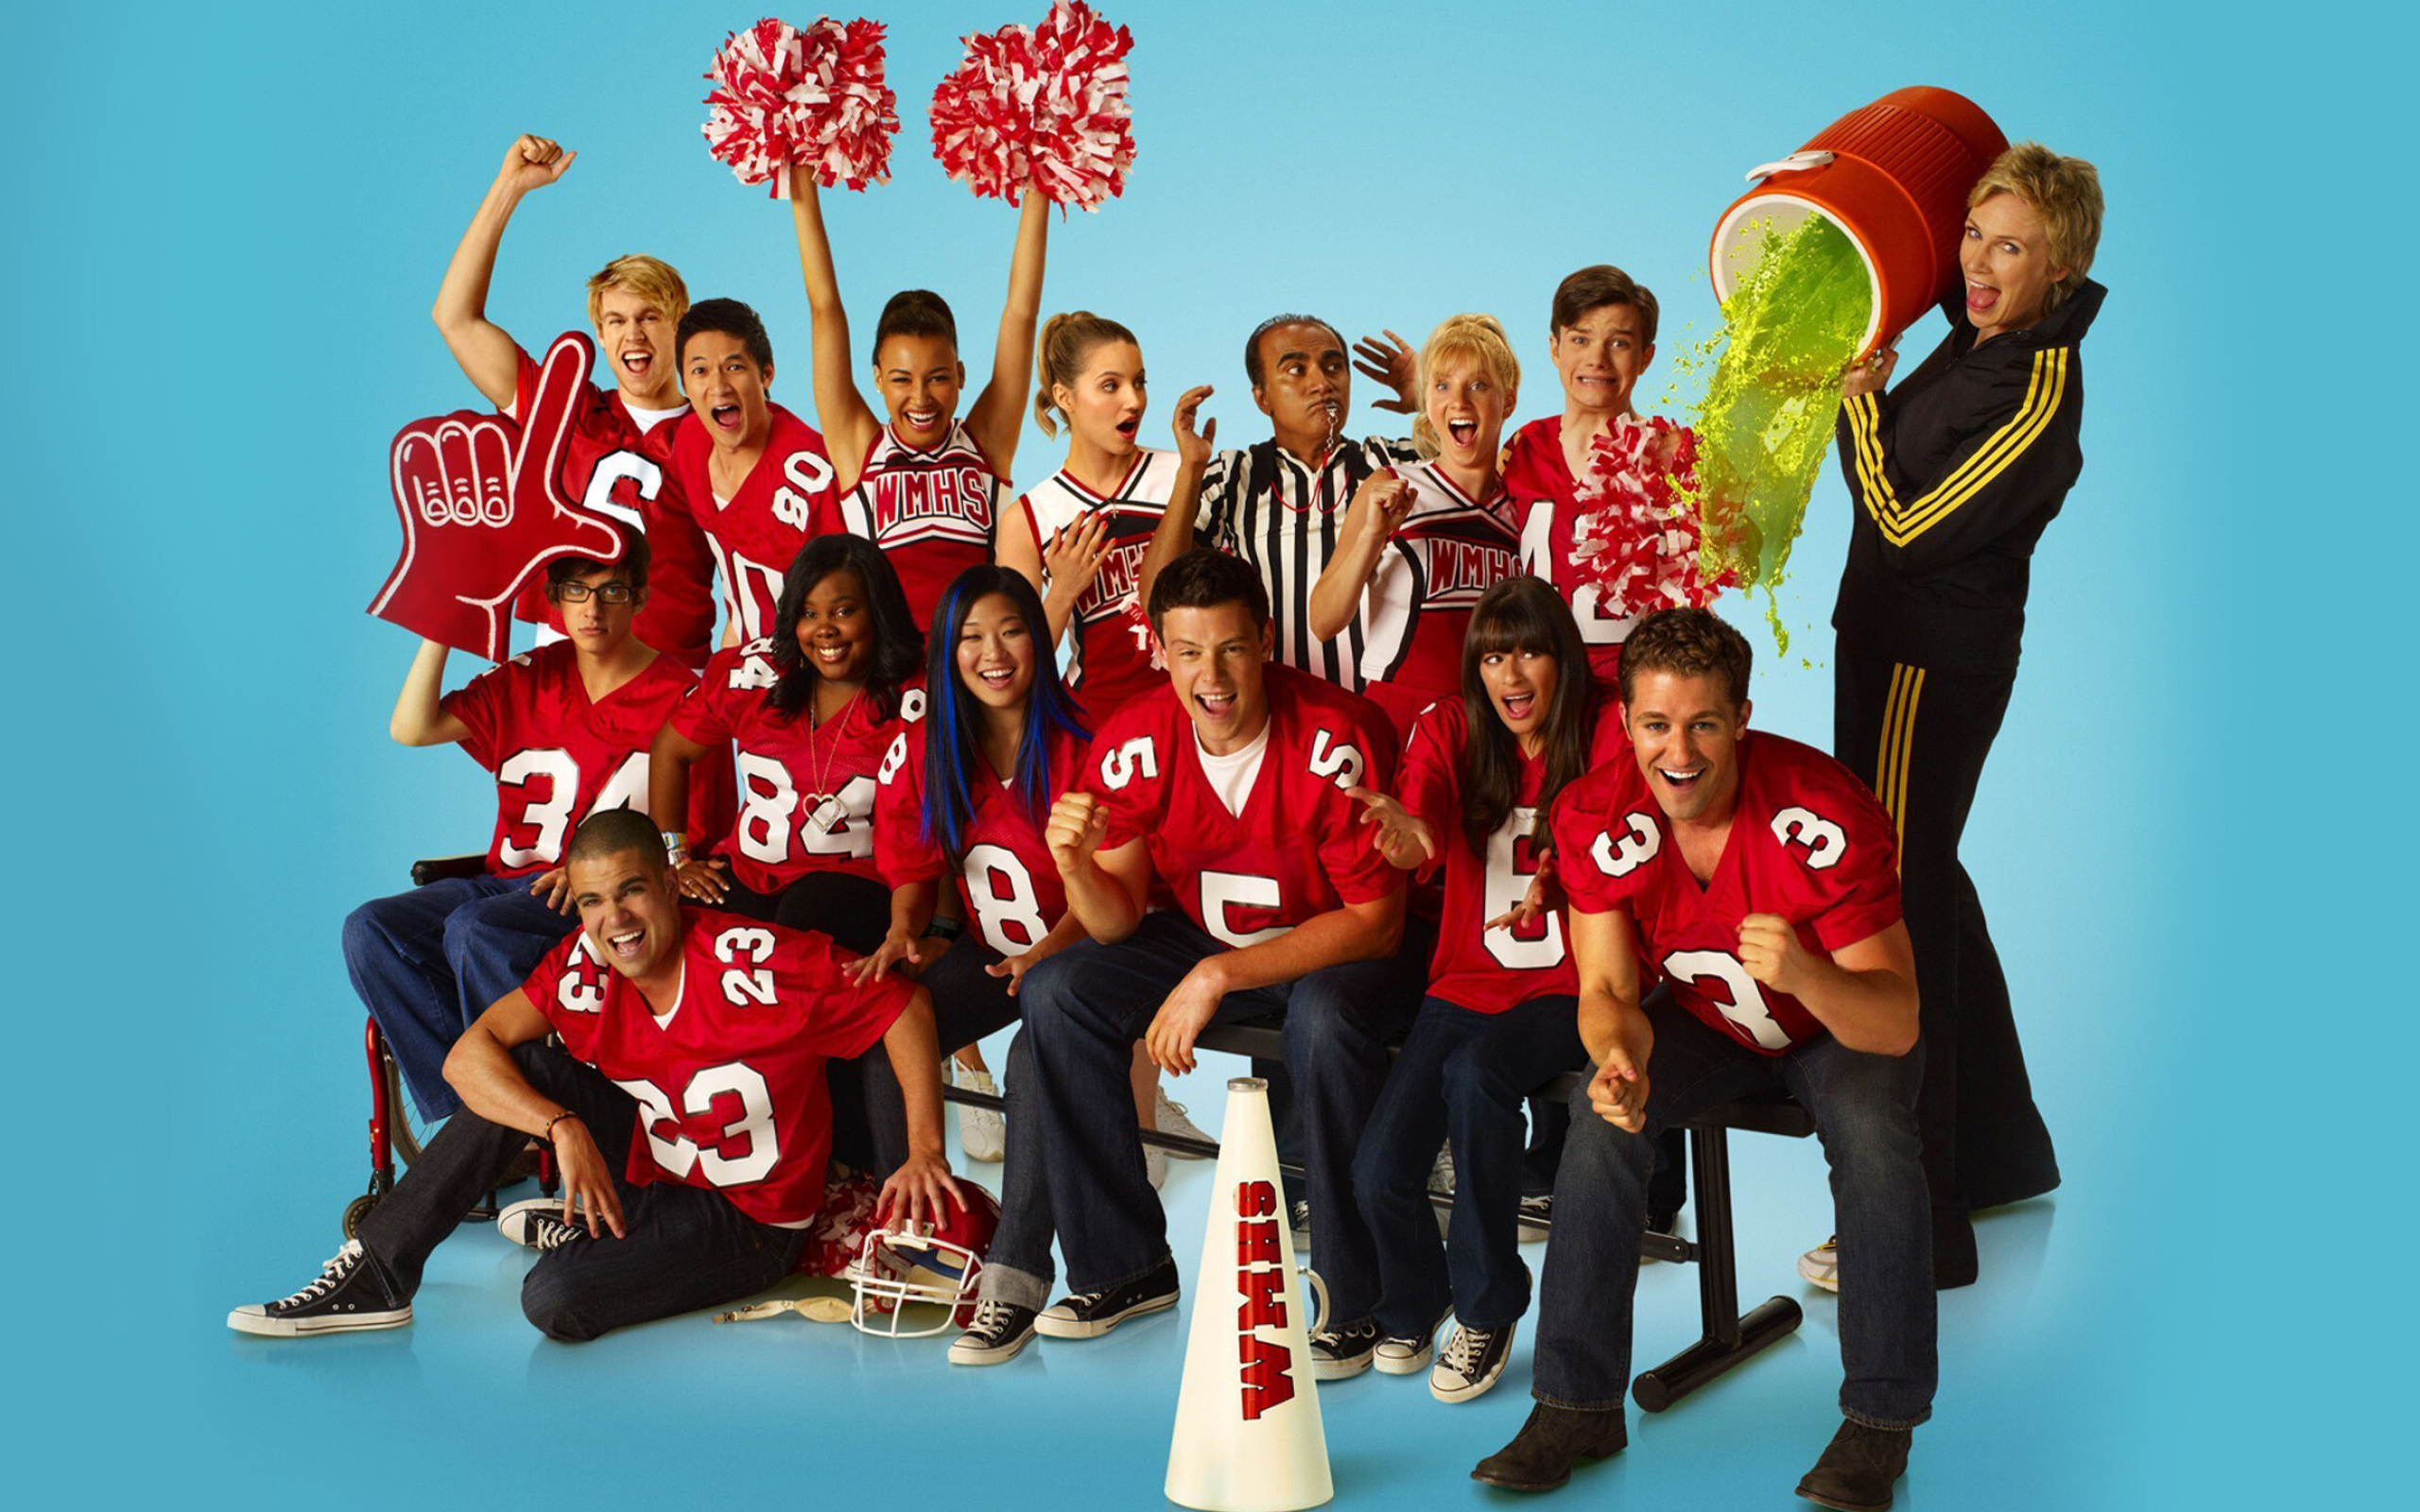 Glee (TV series): WMHS, The 2010 Golden Globe Award for Best Television Series – Musical or Comedy. 2560x1600 HD Wallpaper.